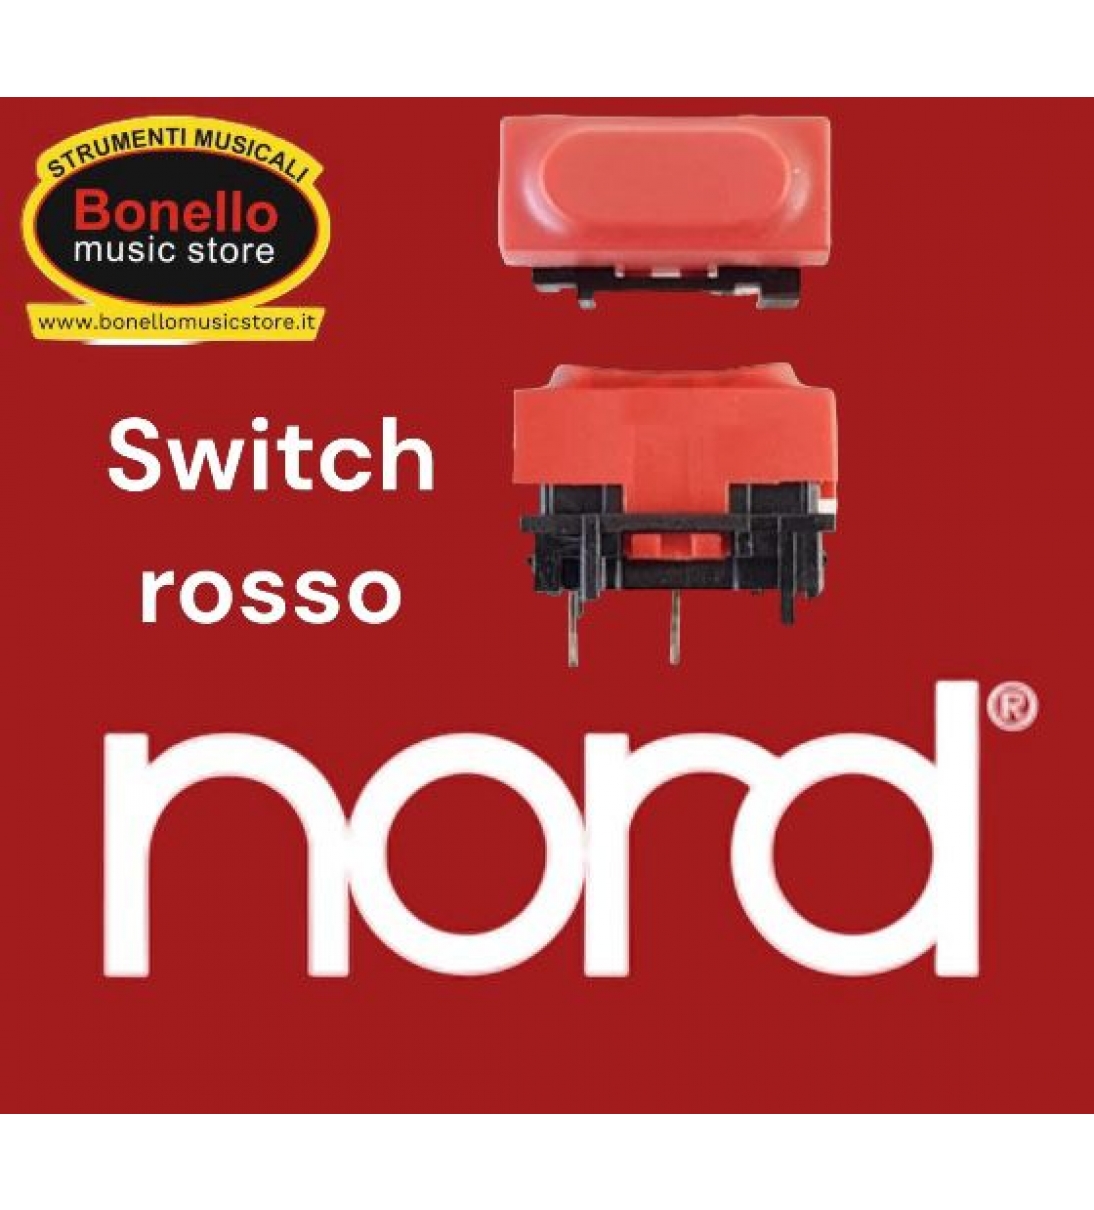 Switch rosso